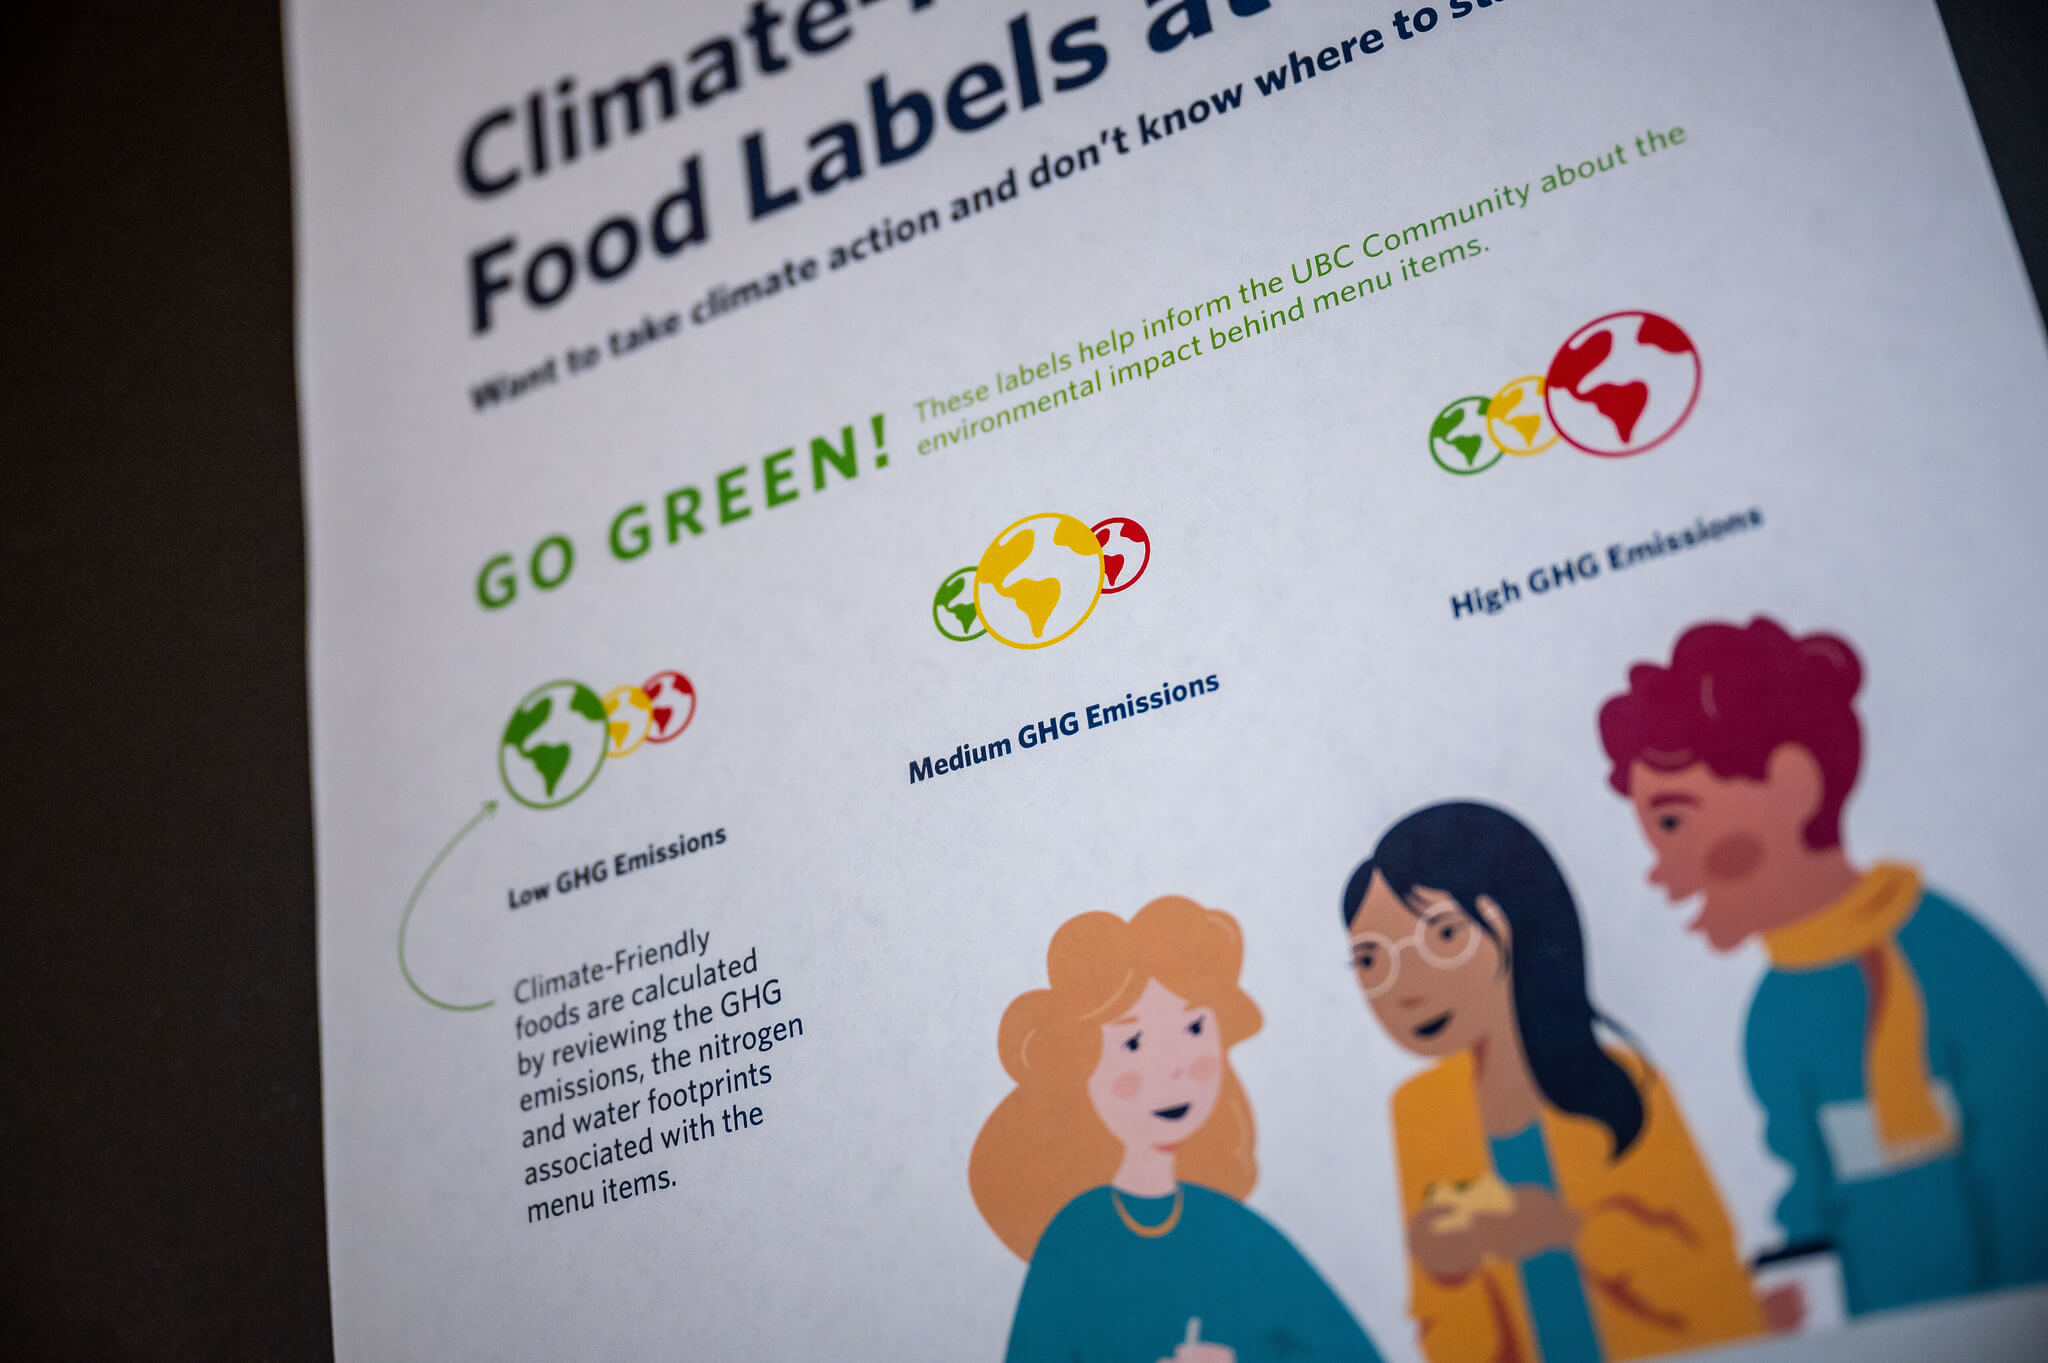 Climate Friendly Food Labels poster featuring the three globe-shaped logos, green, yellow and red to identify the quantity of GHG emissions for different types of food.